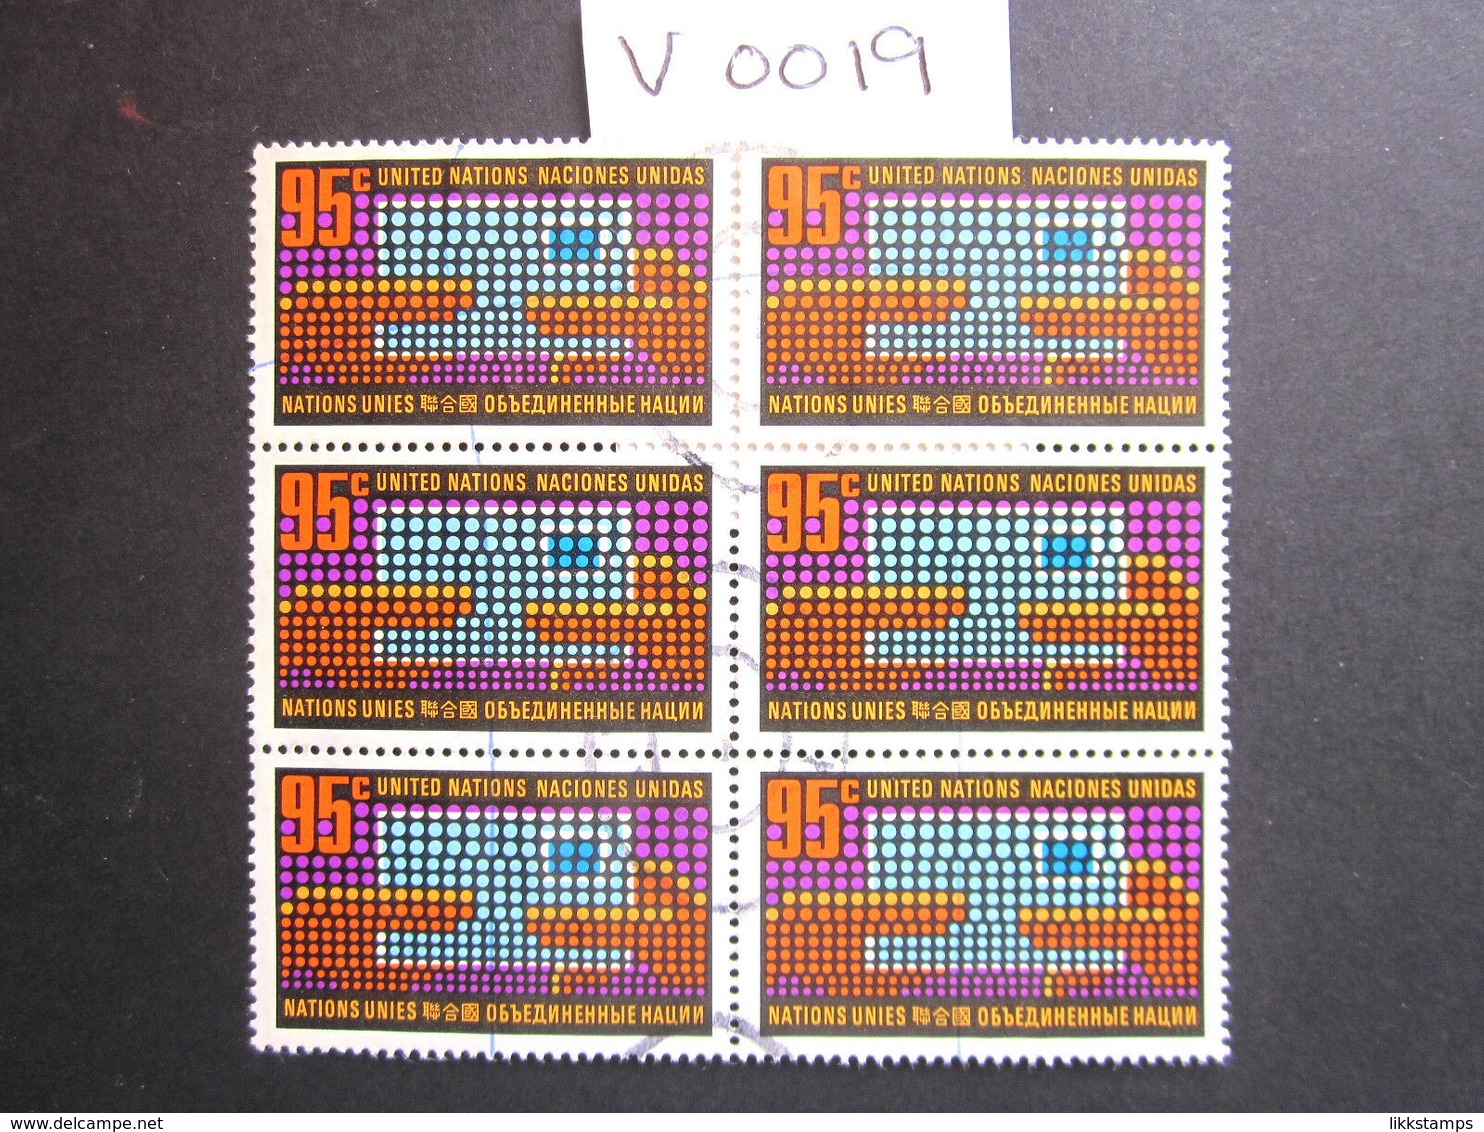 1971 FINE USED BLOCK OF 6 "SG 224" PICTORIAL UNITED NATIONS USED STAMPS. ( V0019 ) #00347 - Collezioni & Lotti